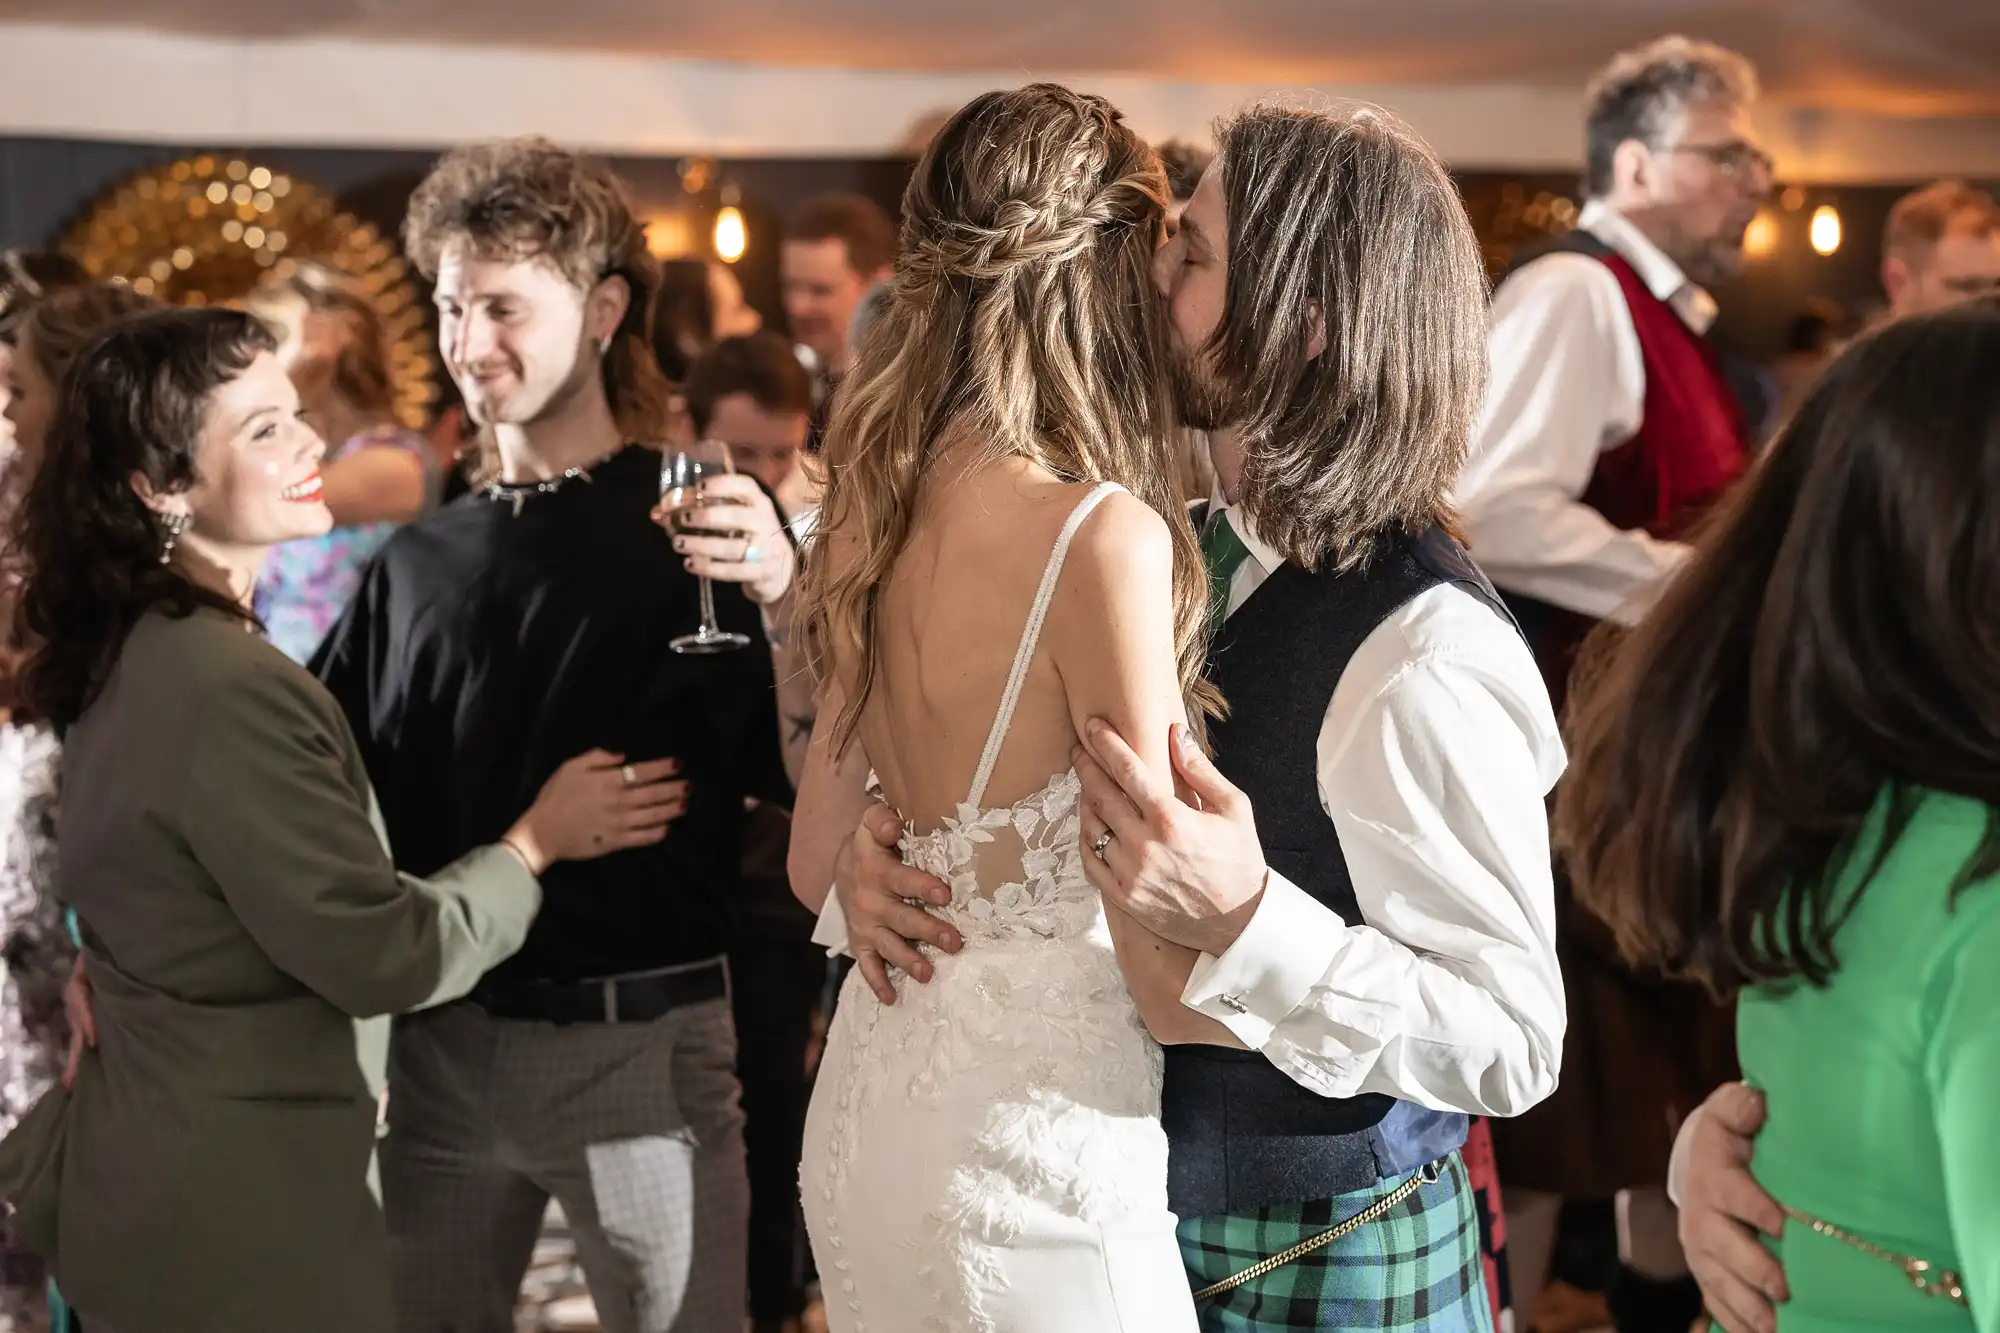 A couple, with the woman in a white dress and the man in a plaid kilt, dance closely at a lively event with other pairs dancing and mingling in the background.